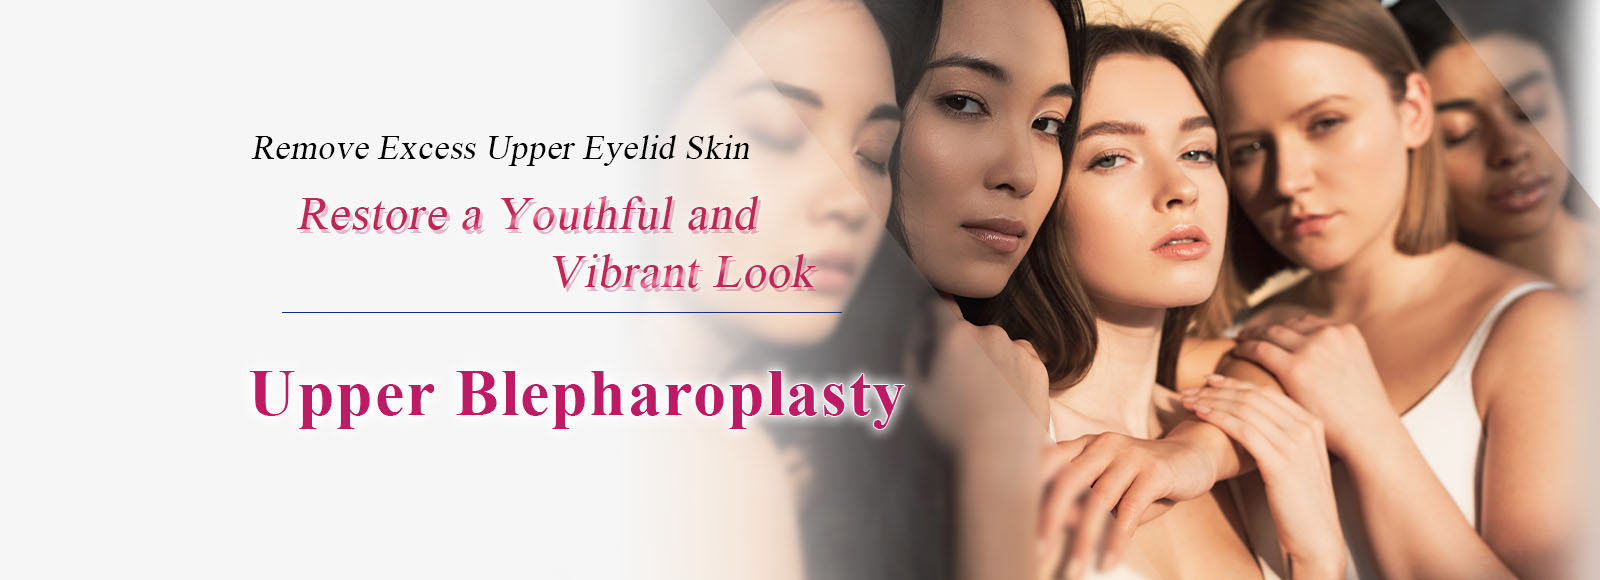 Restore a youthful and vibrant look. Upper Blepharoplasty